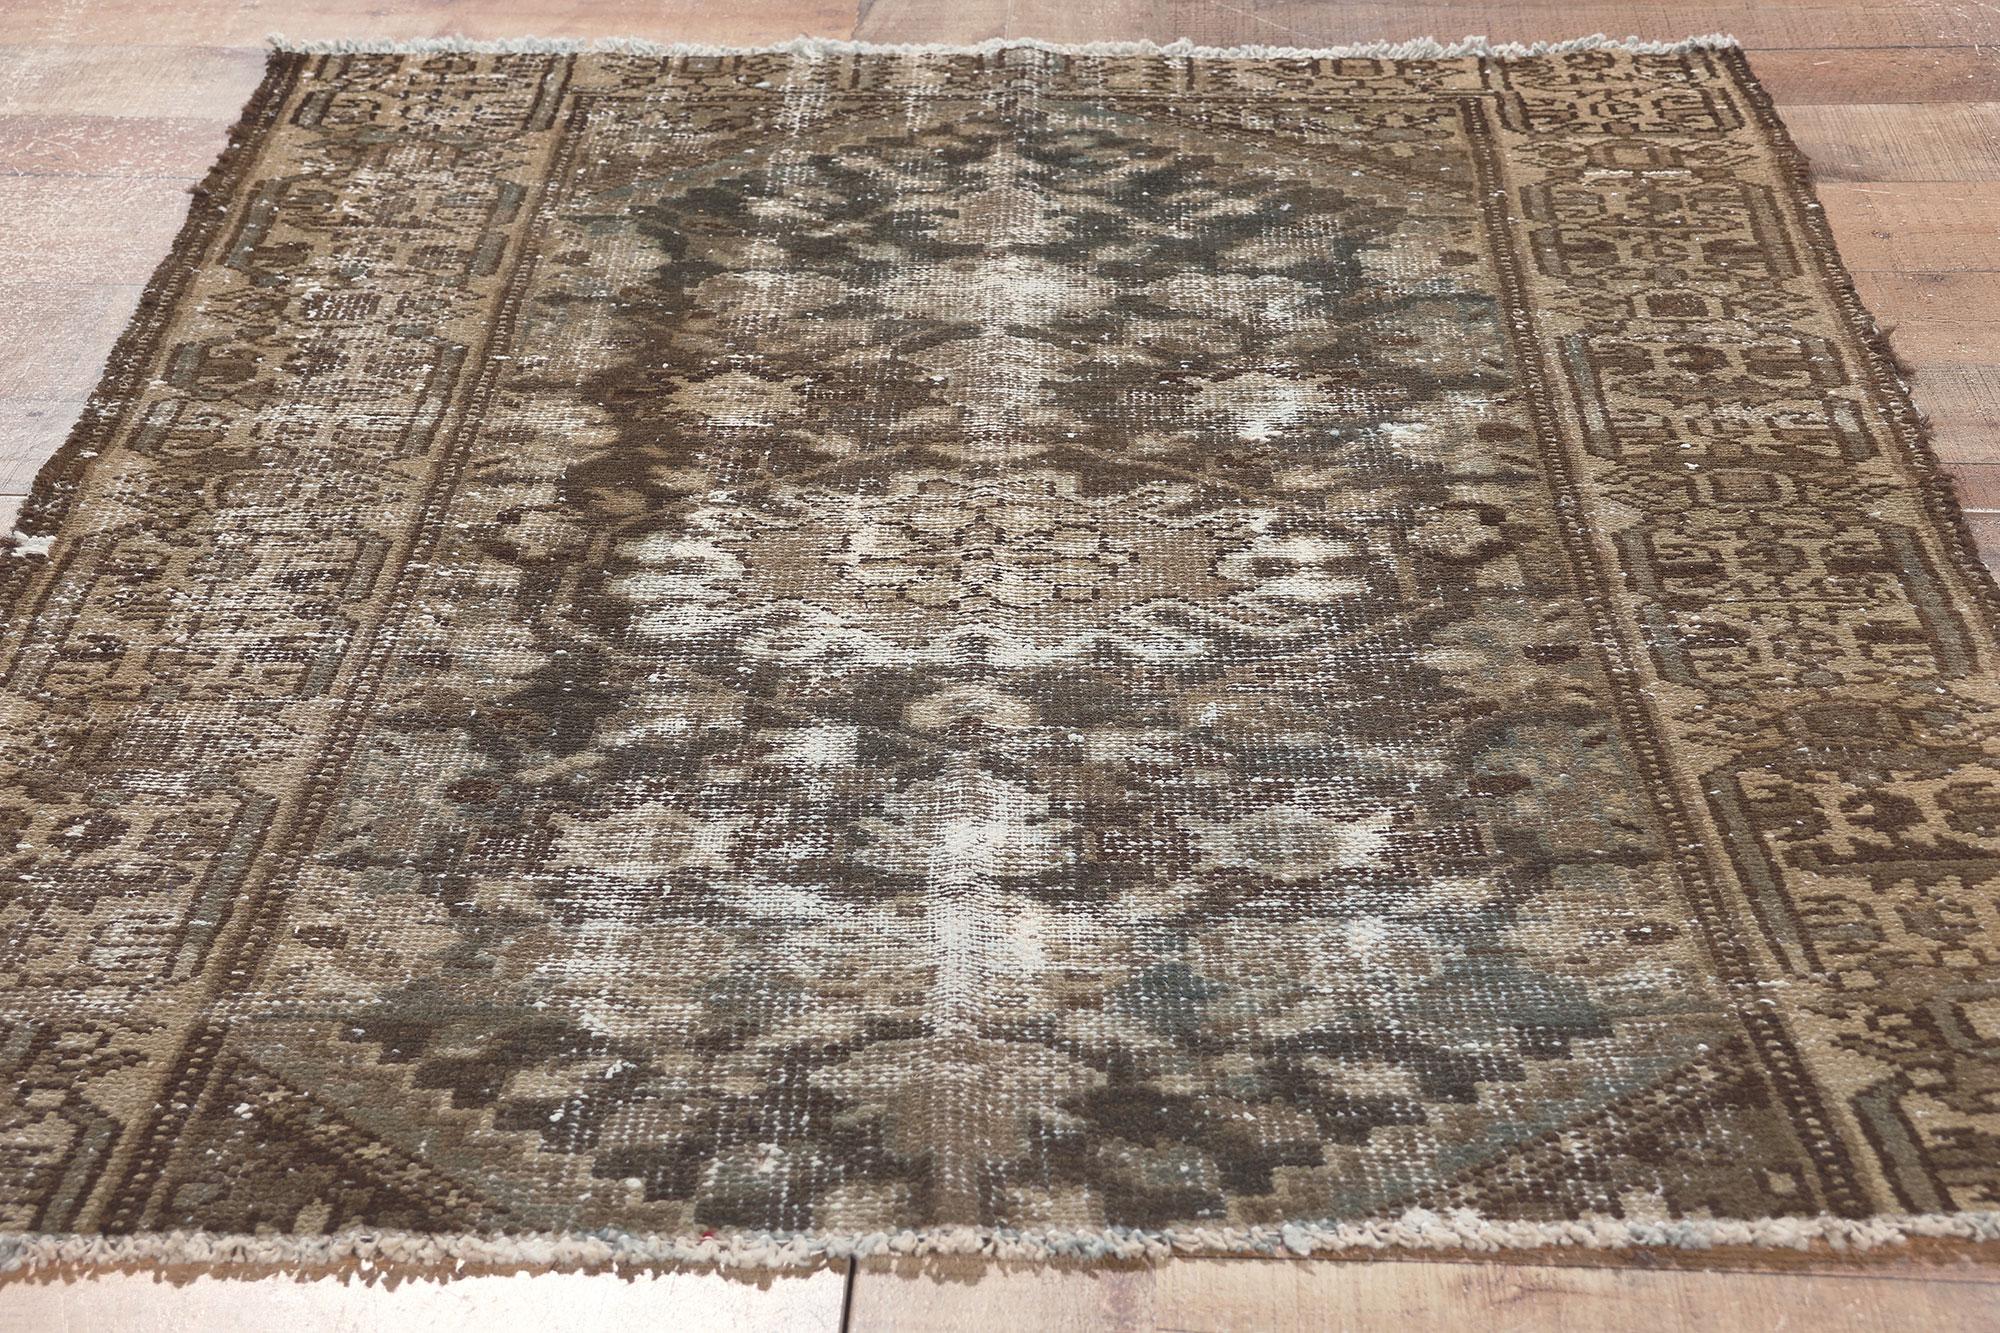 Distressed Antique Worn Persian Rug, Rustic Sensibility Meets Weathered Finesse For Sale 2